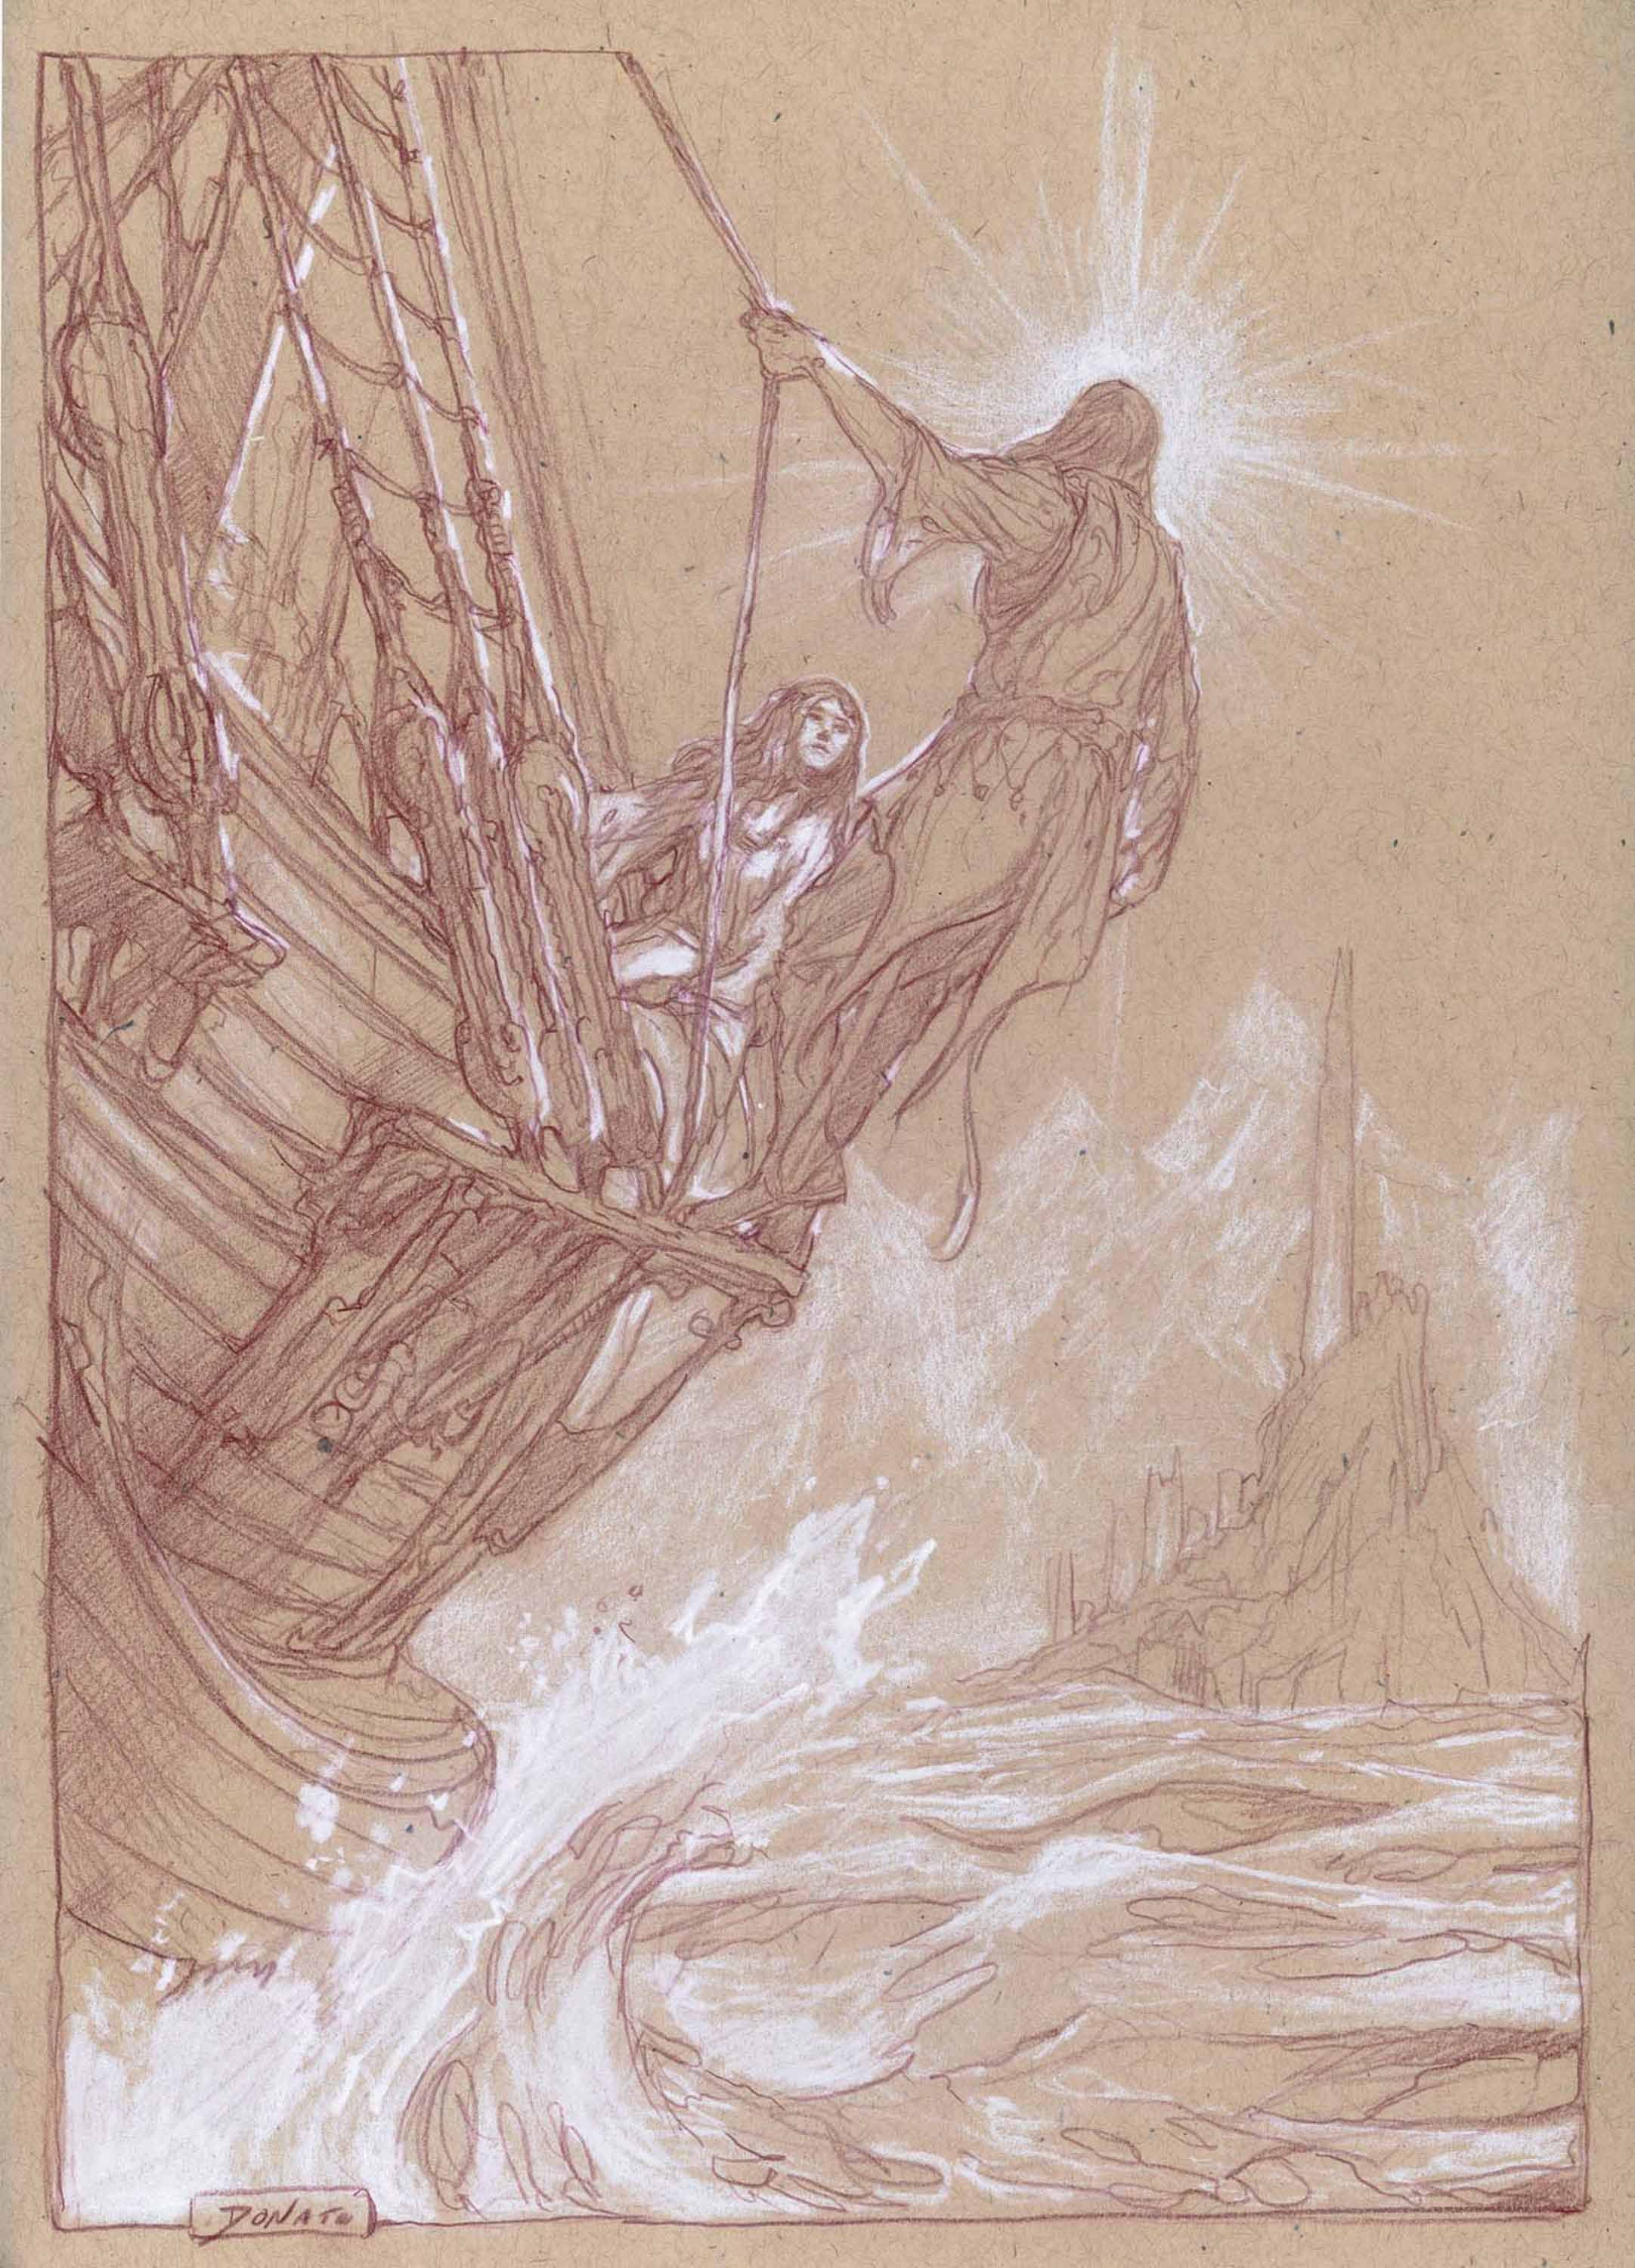 Earendil and Elwing Approaching Valinor
11" x 8"  Watercolor Pencil and Chalk on Toned paper 2012
private collection